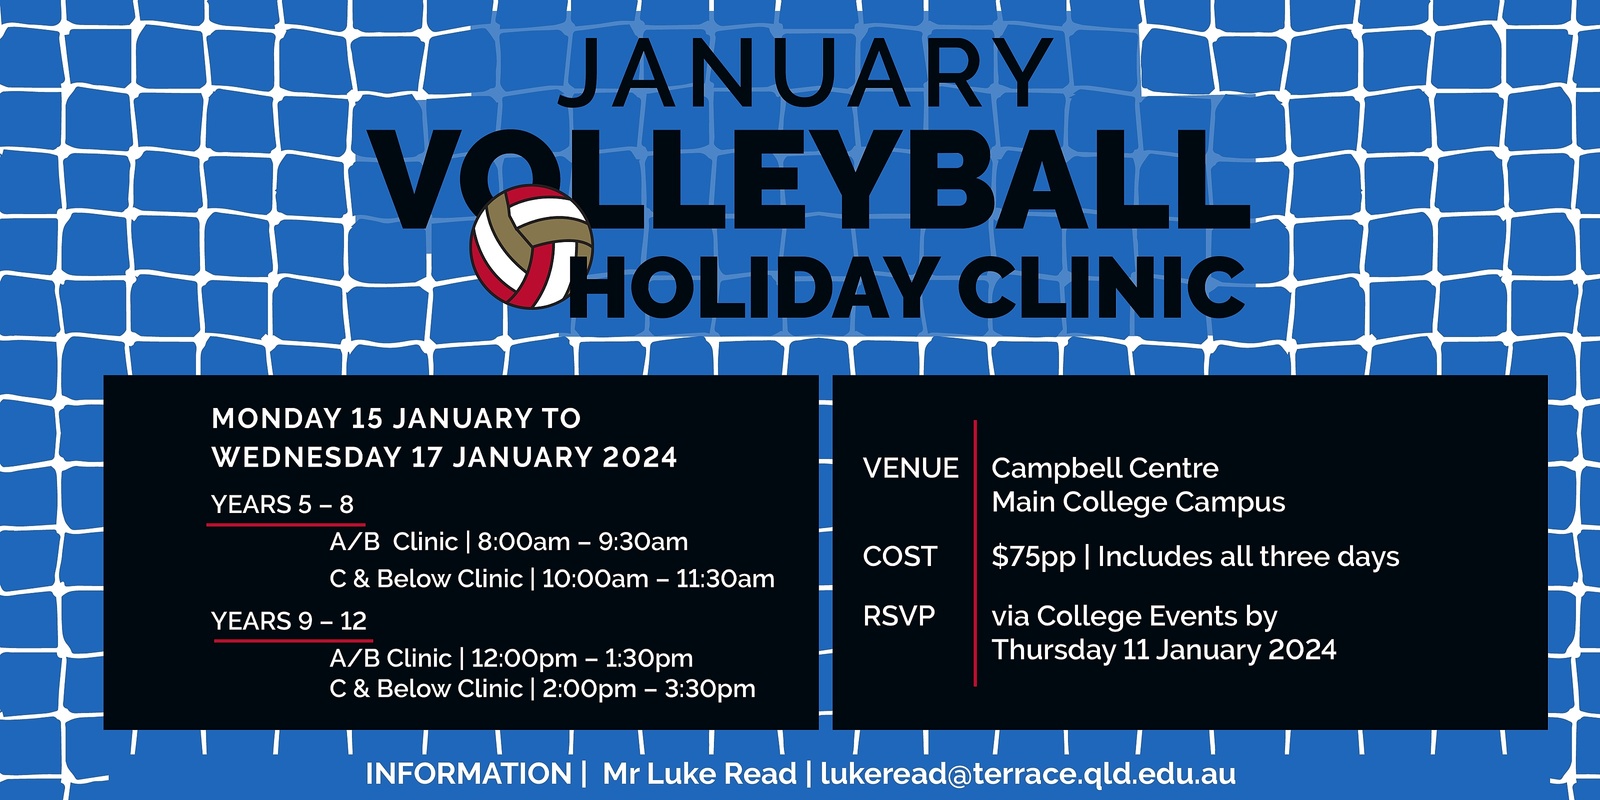 Banner image for Volleyball January Holiday Clinics